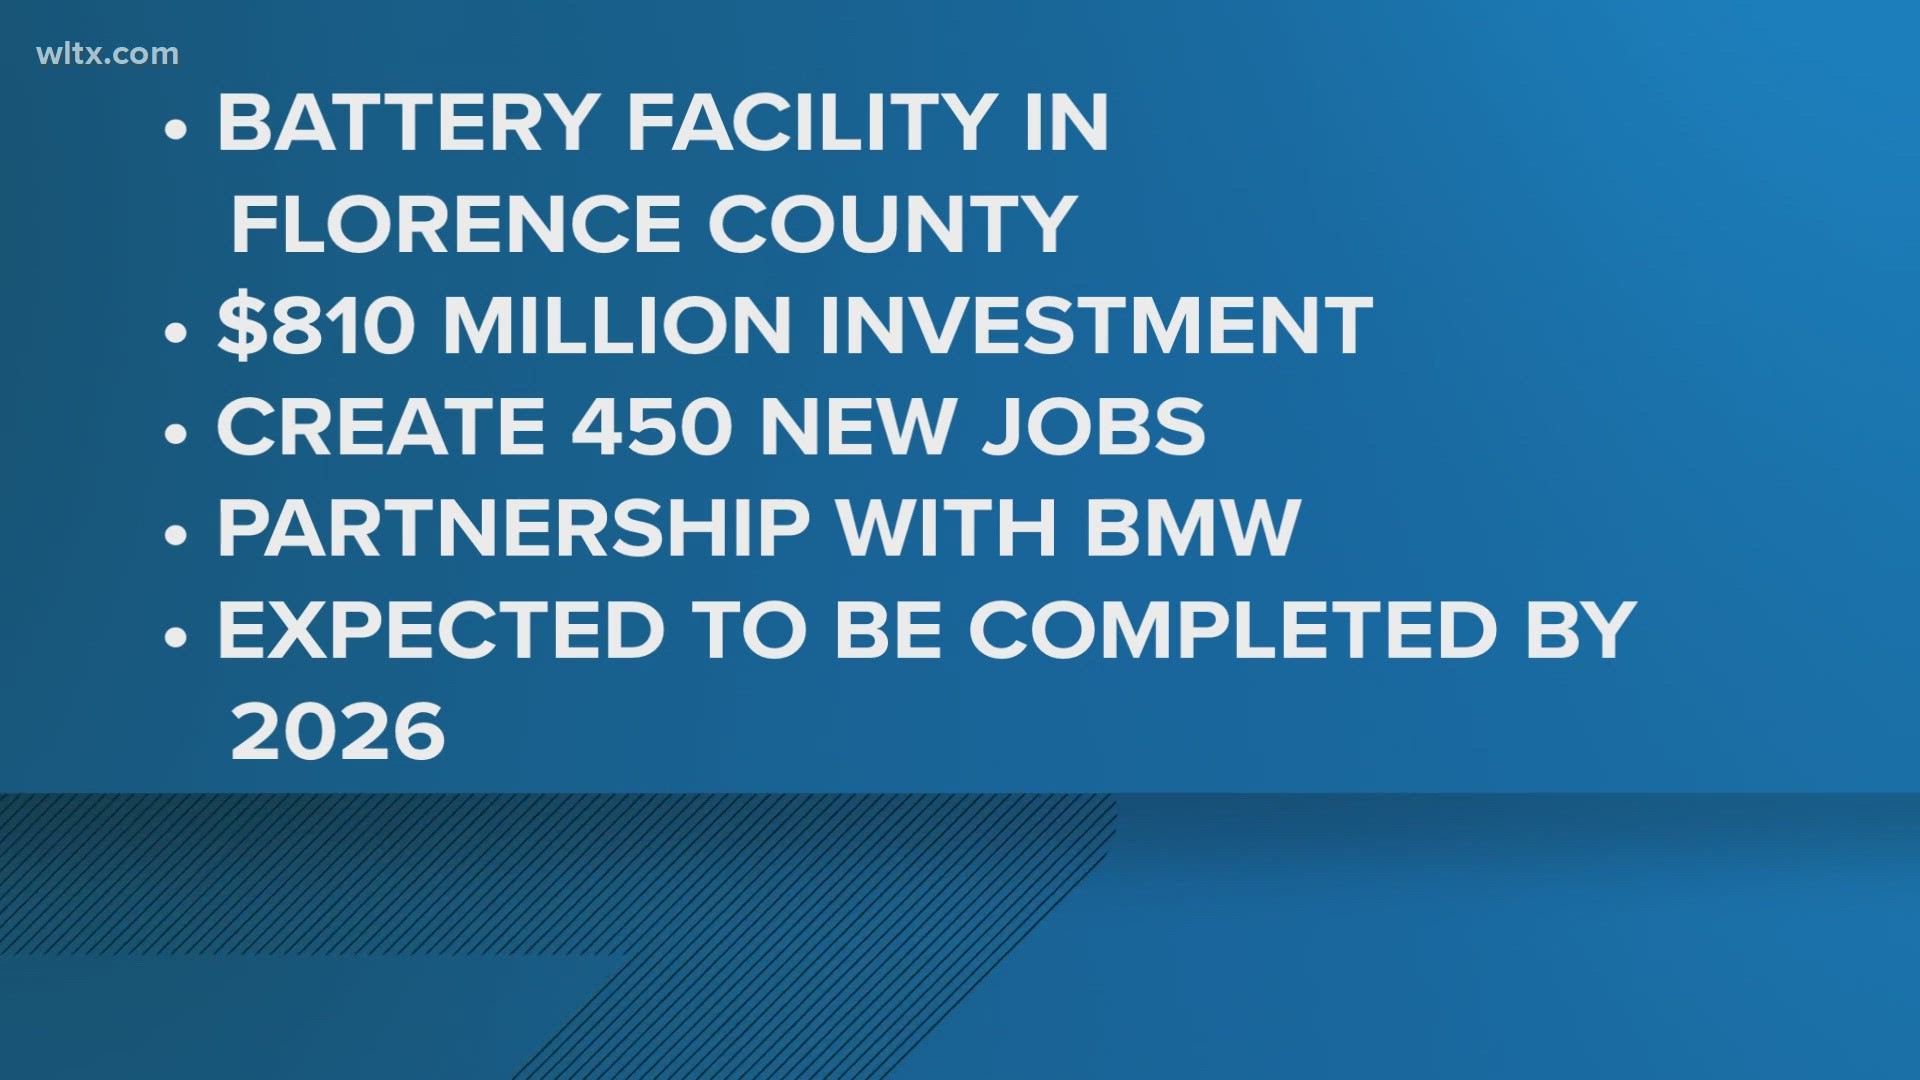 AESC is expanding it's battery facility in Florence County with an $810M investment.